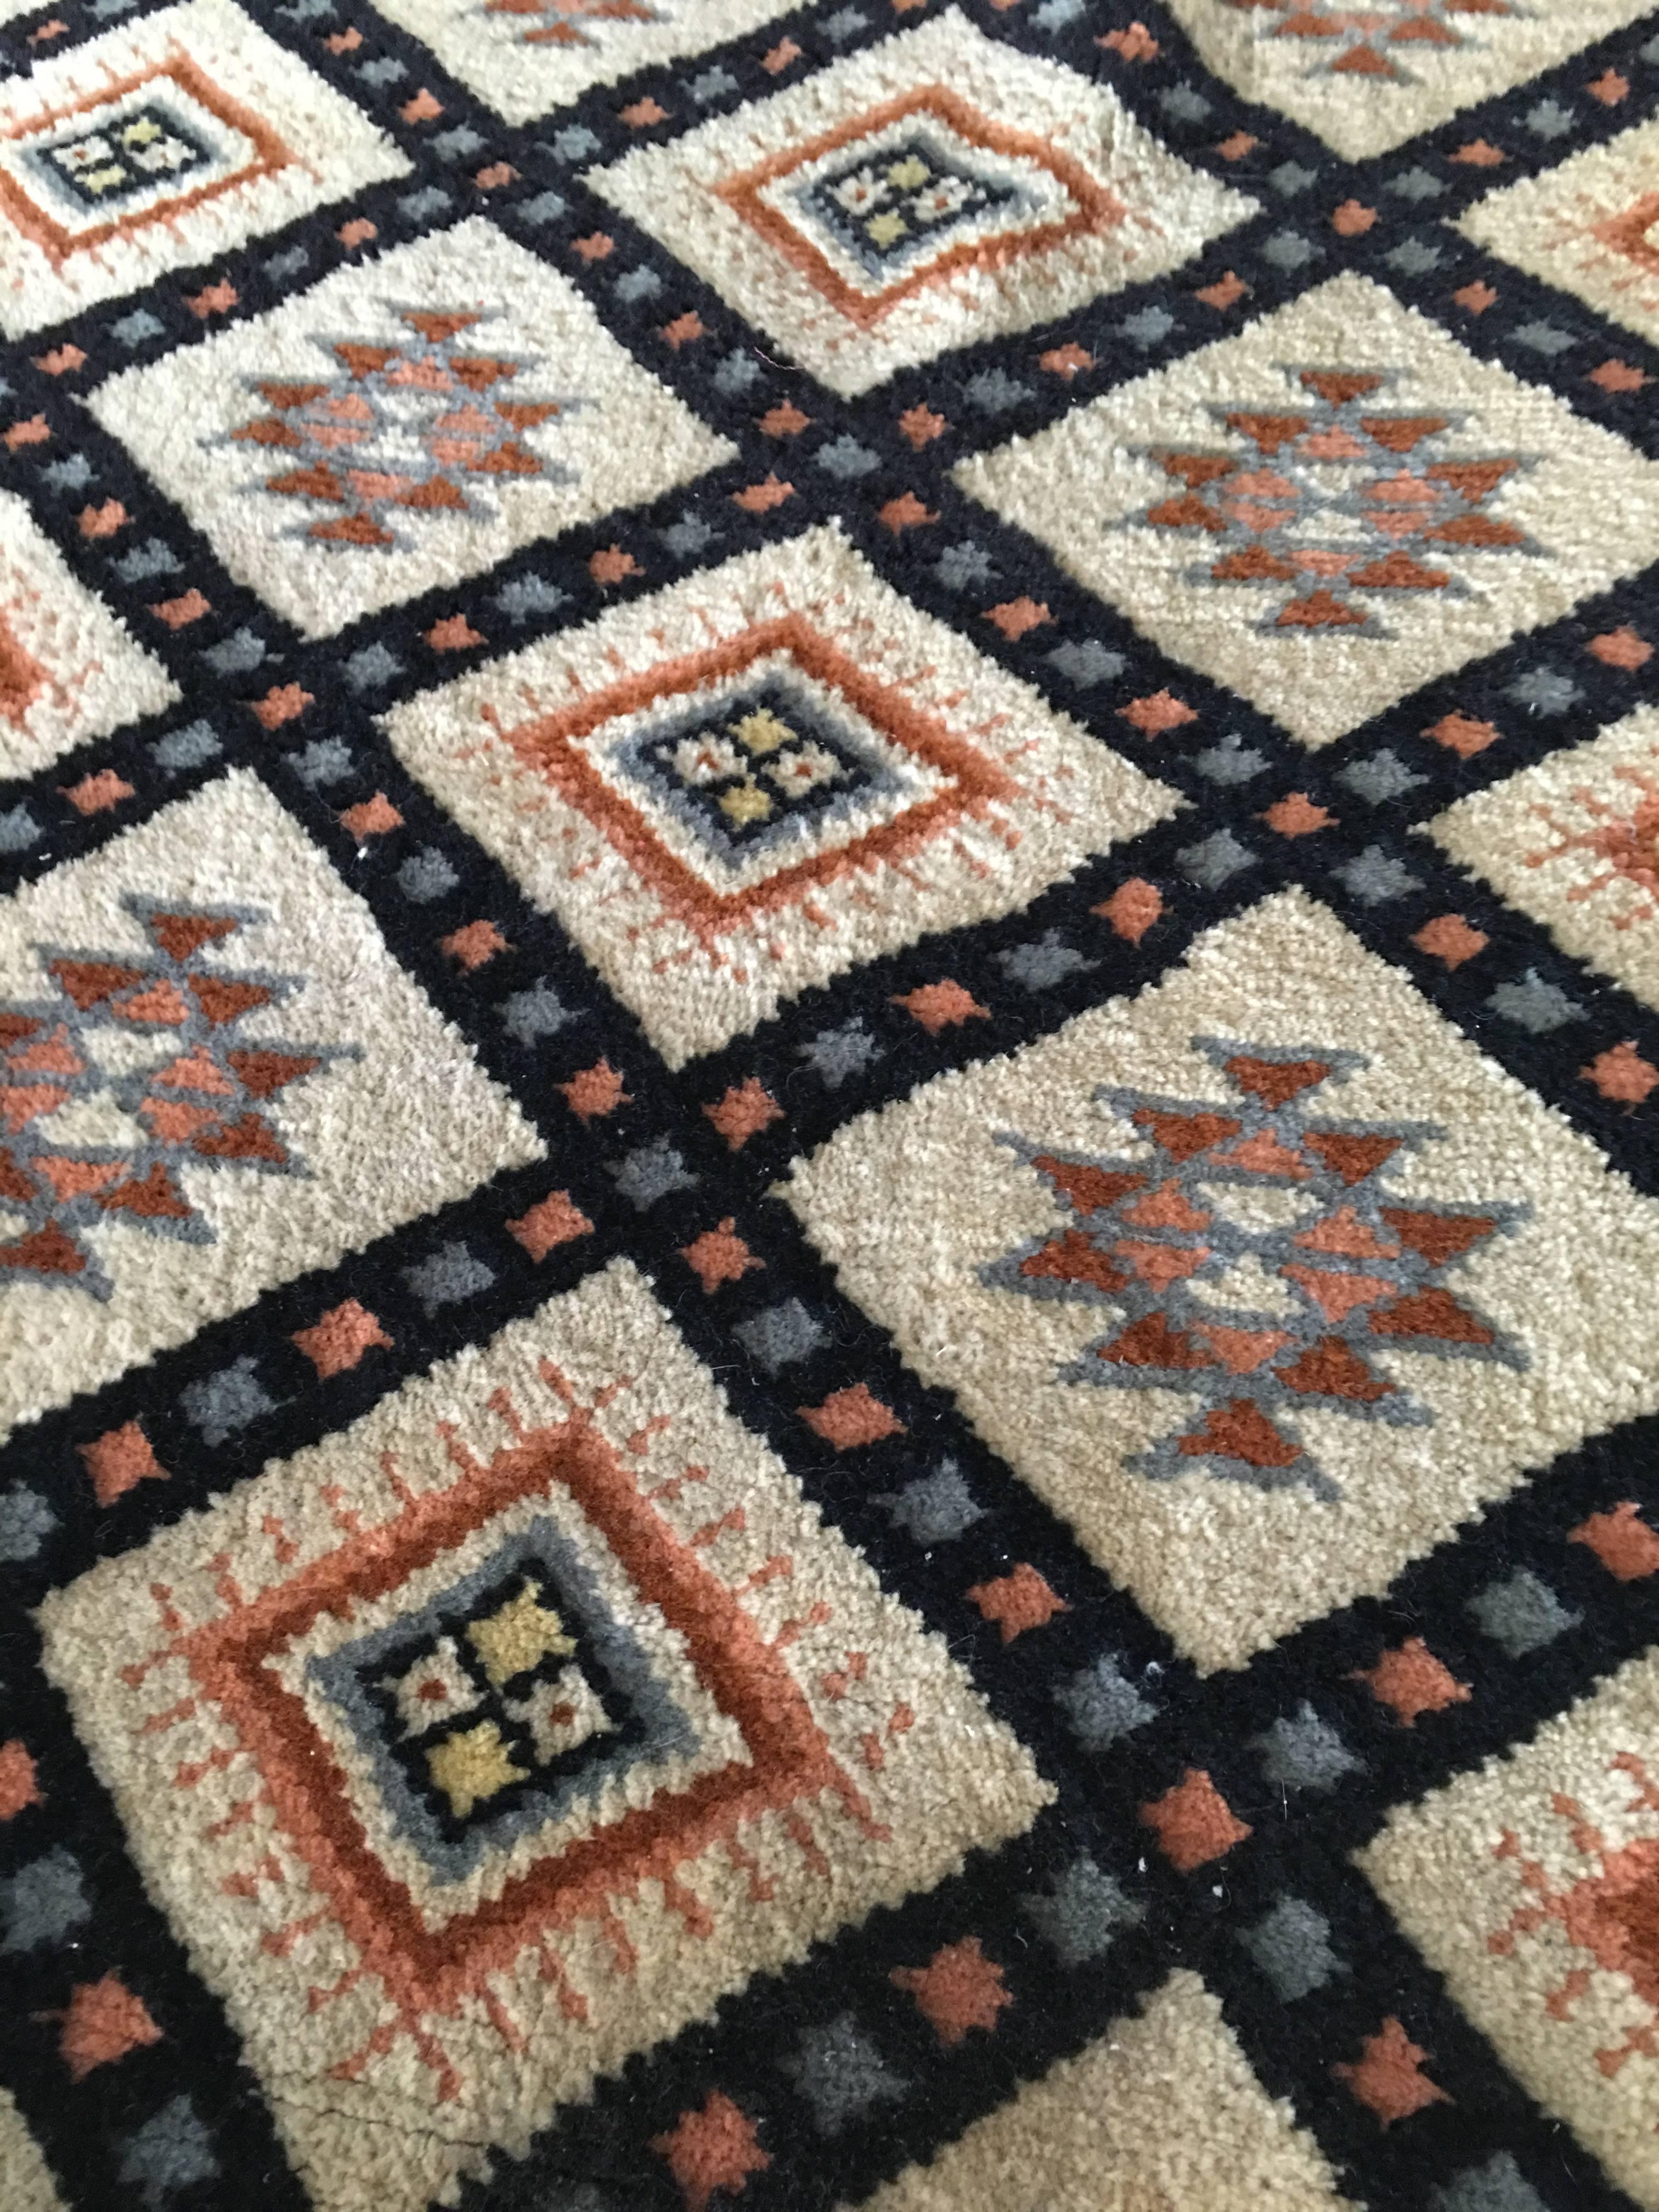 This lovely Moroccan rug displays exciting, abstract and modern designs.
Unlike traditional rugs found in western interior spaces, Moroccan carpets embody an inviting combination of history and design that fit wonderfully with Minimalist décor and